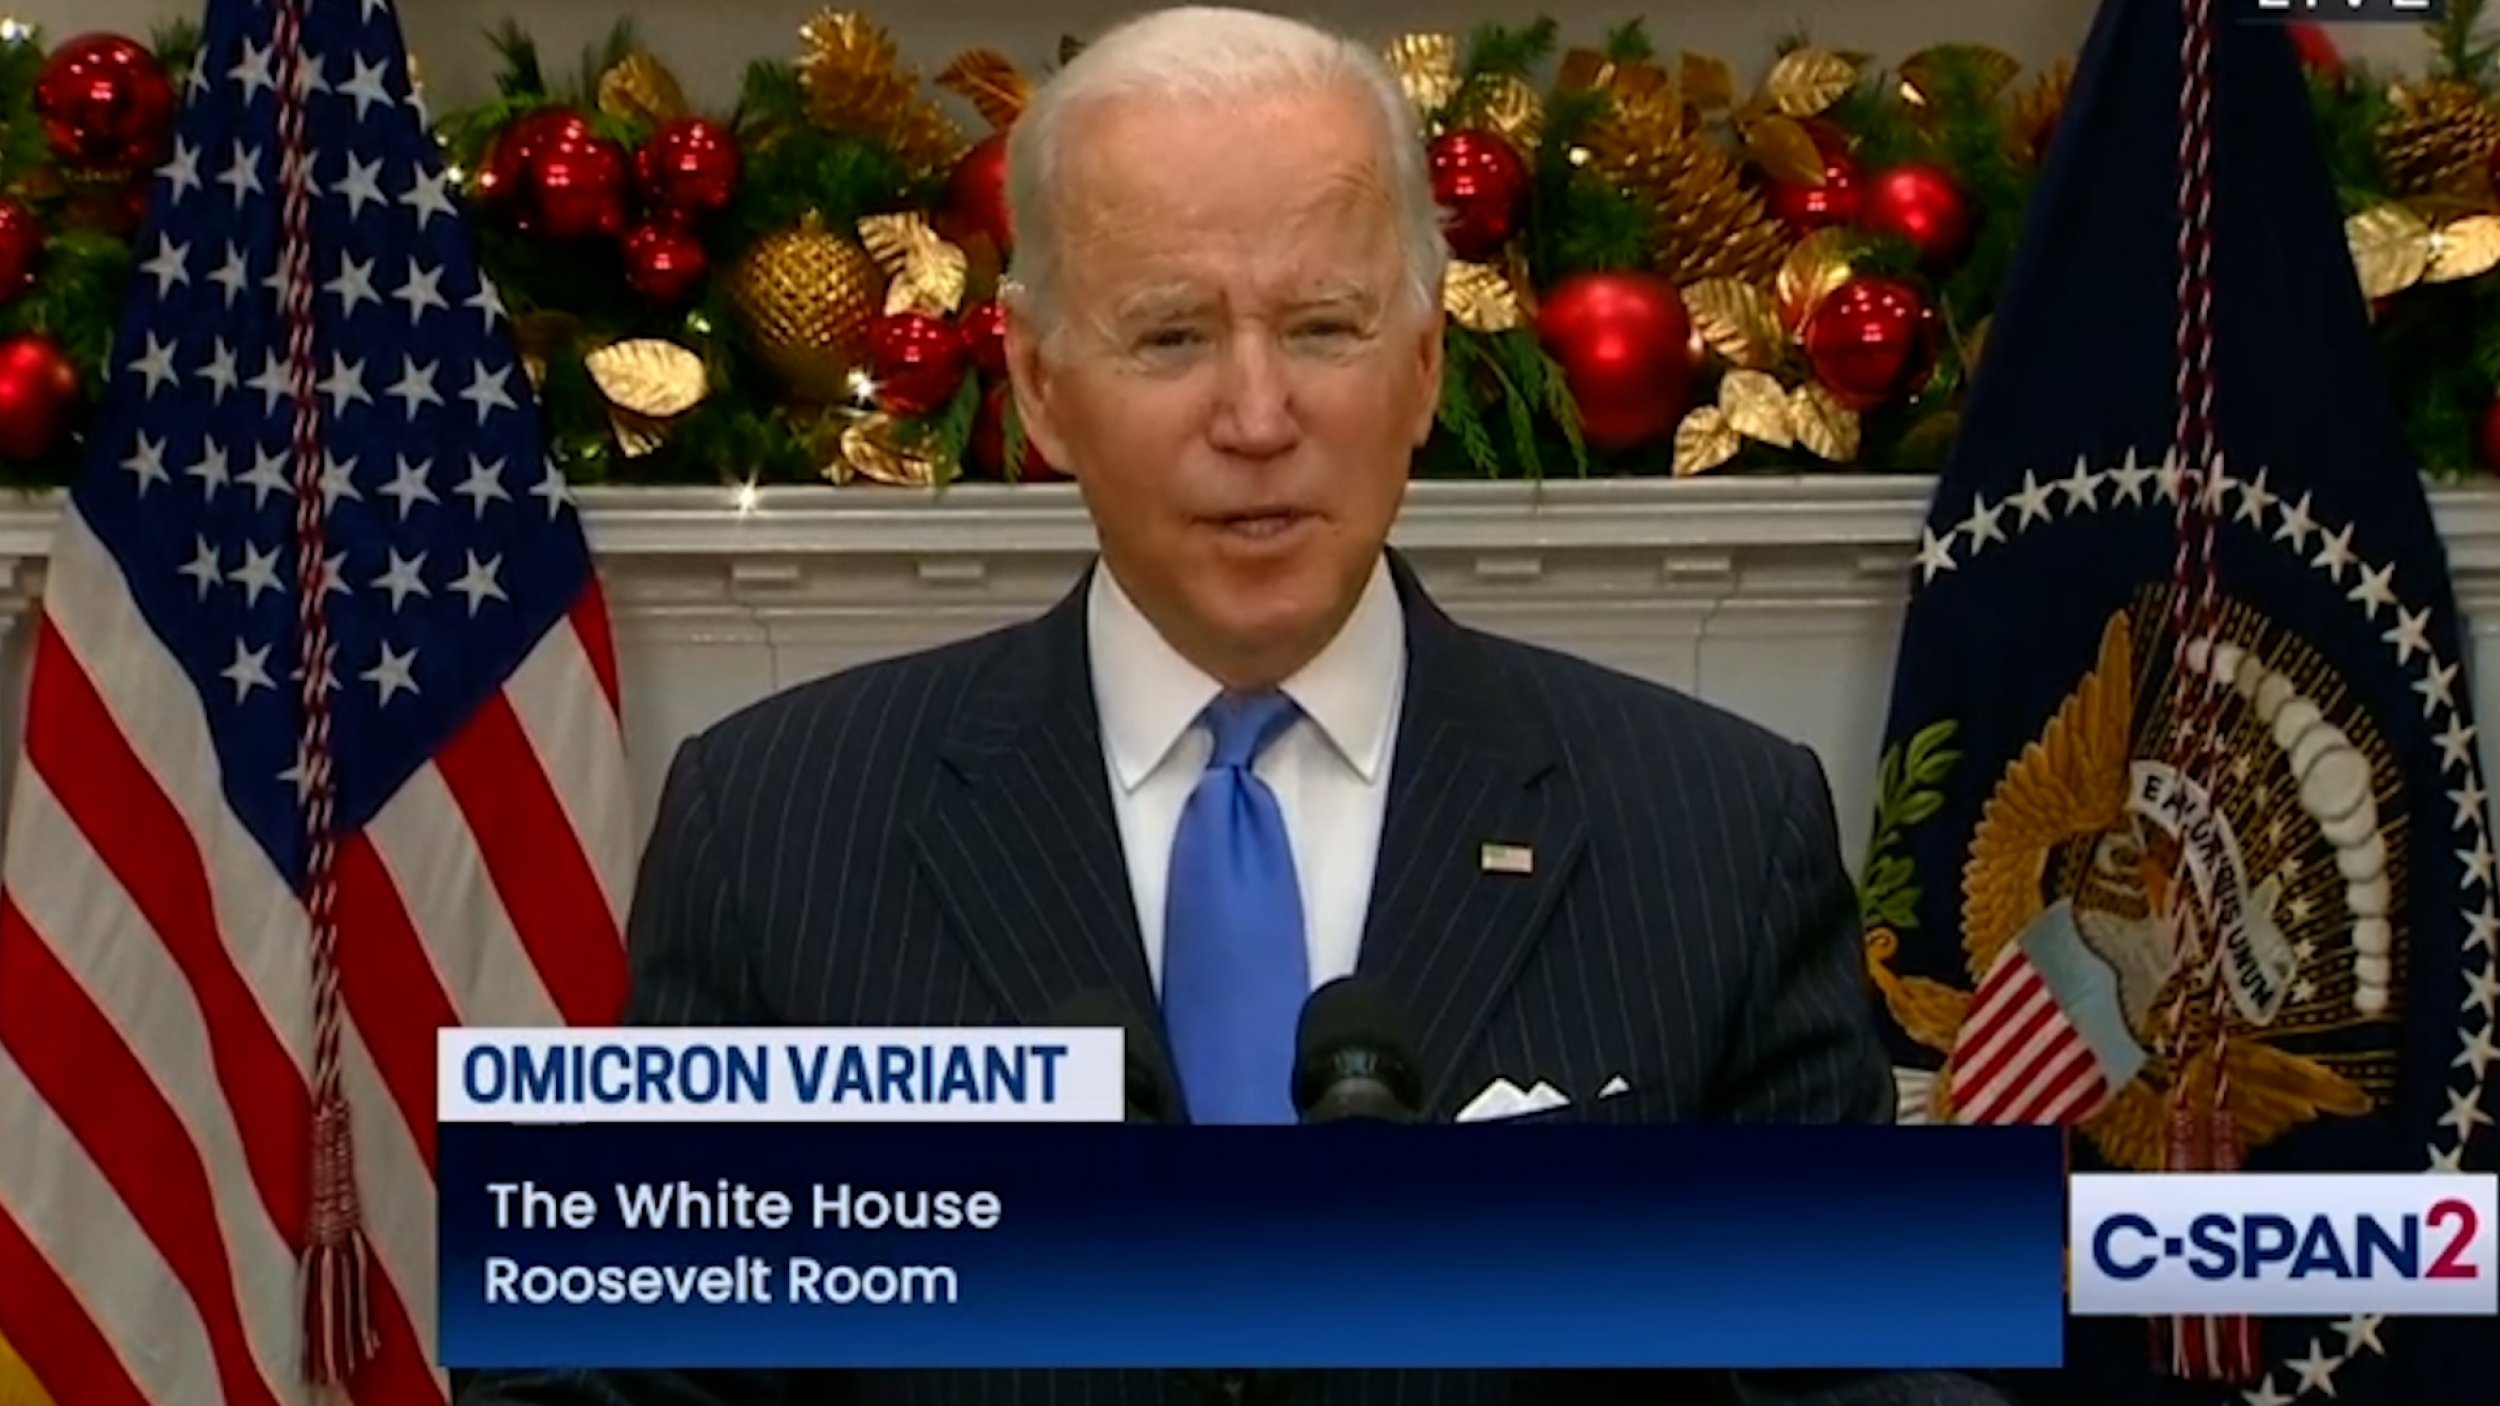 Biden Vows U.S. Will Fight New Omicron Variant With Vaccines, Not Lockdowns Or Shutdowns